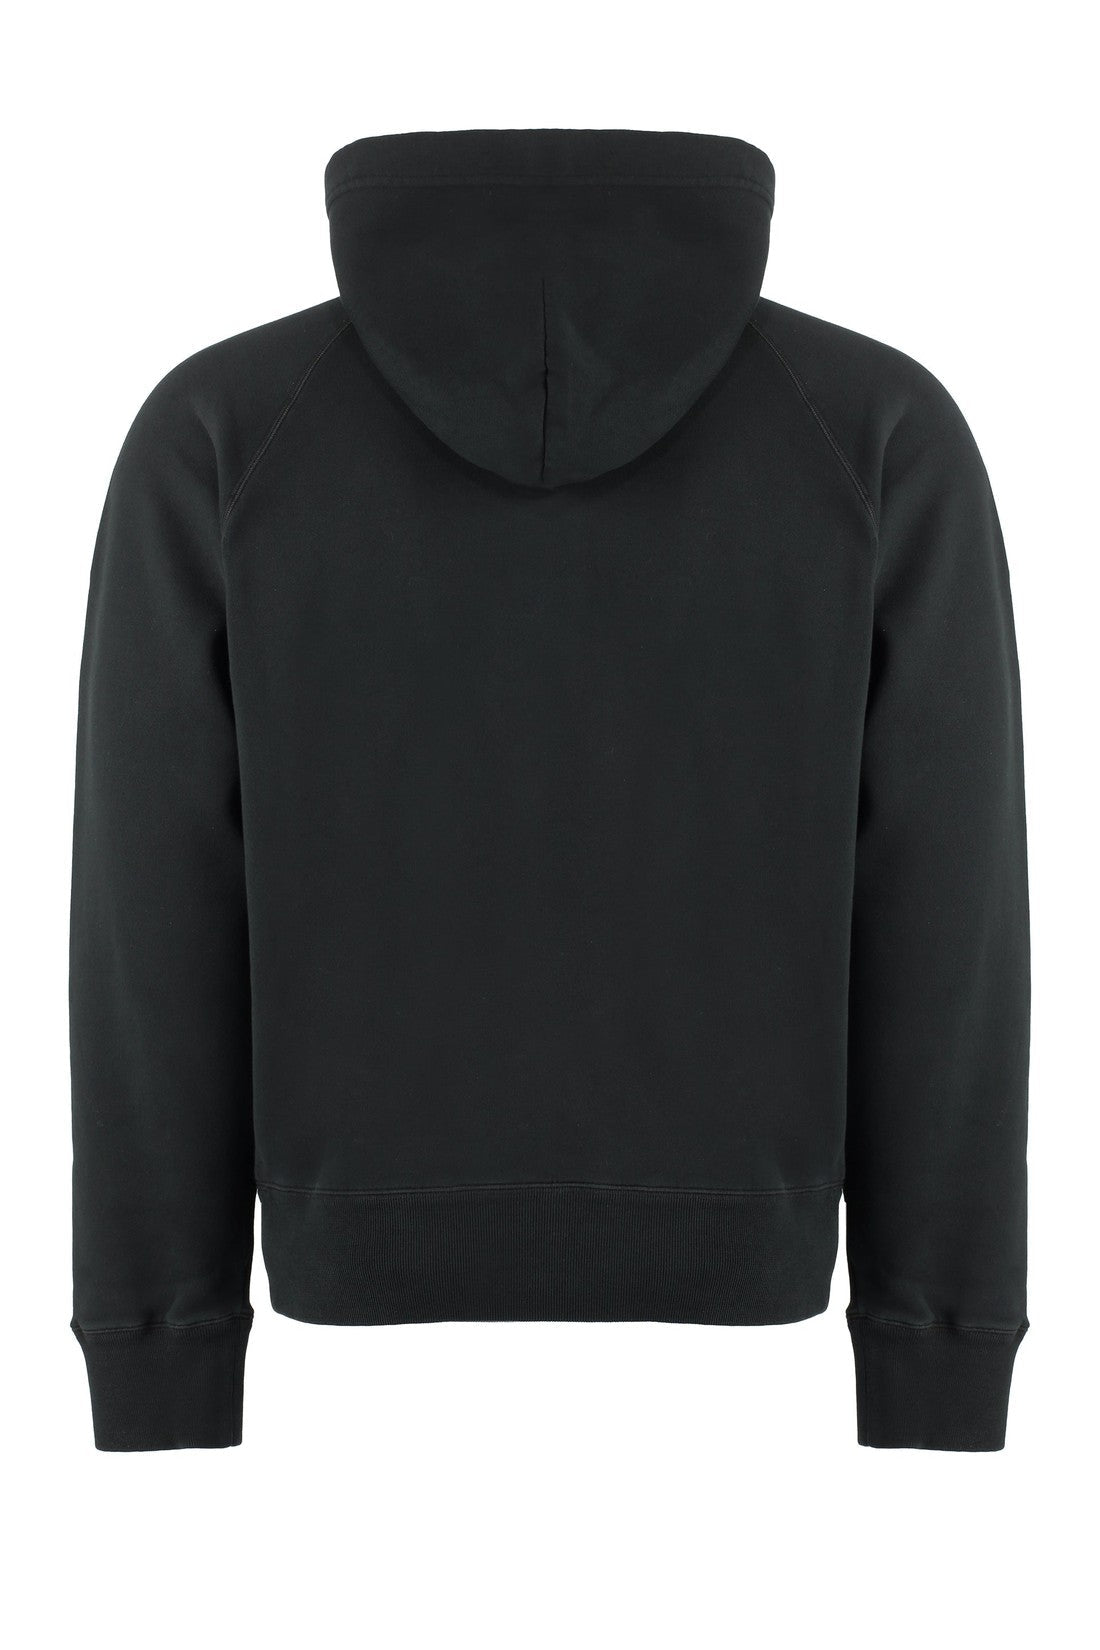 Tom Ford-OUTLET-SALE-Cotton full zip hoodie-ARCHIVIST